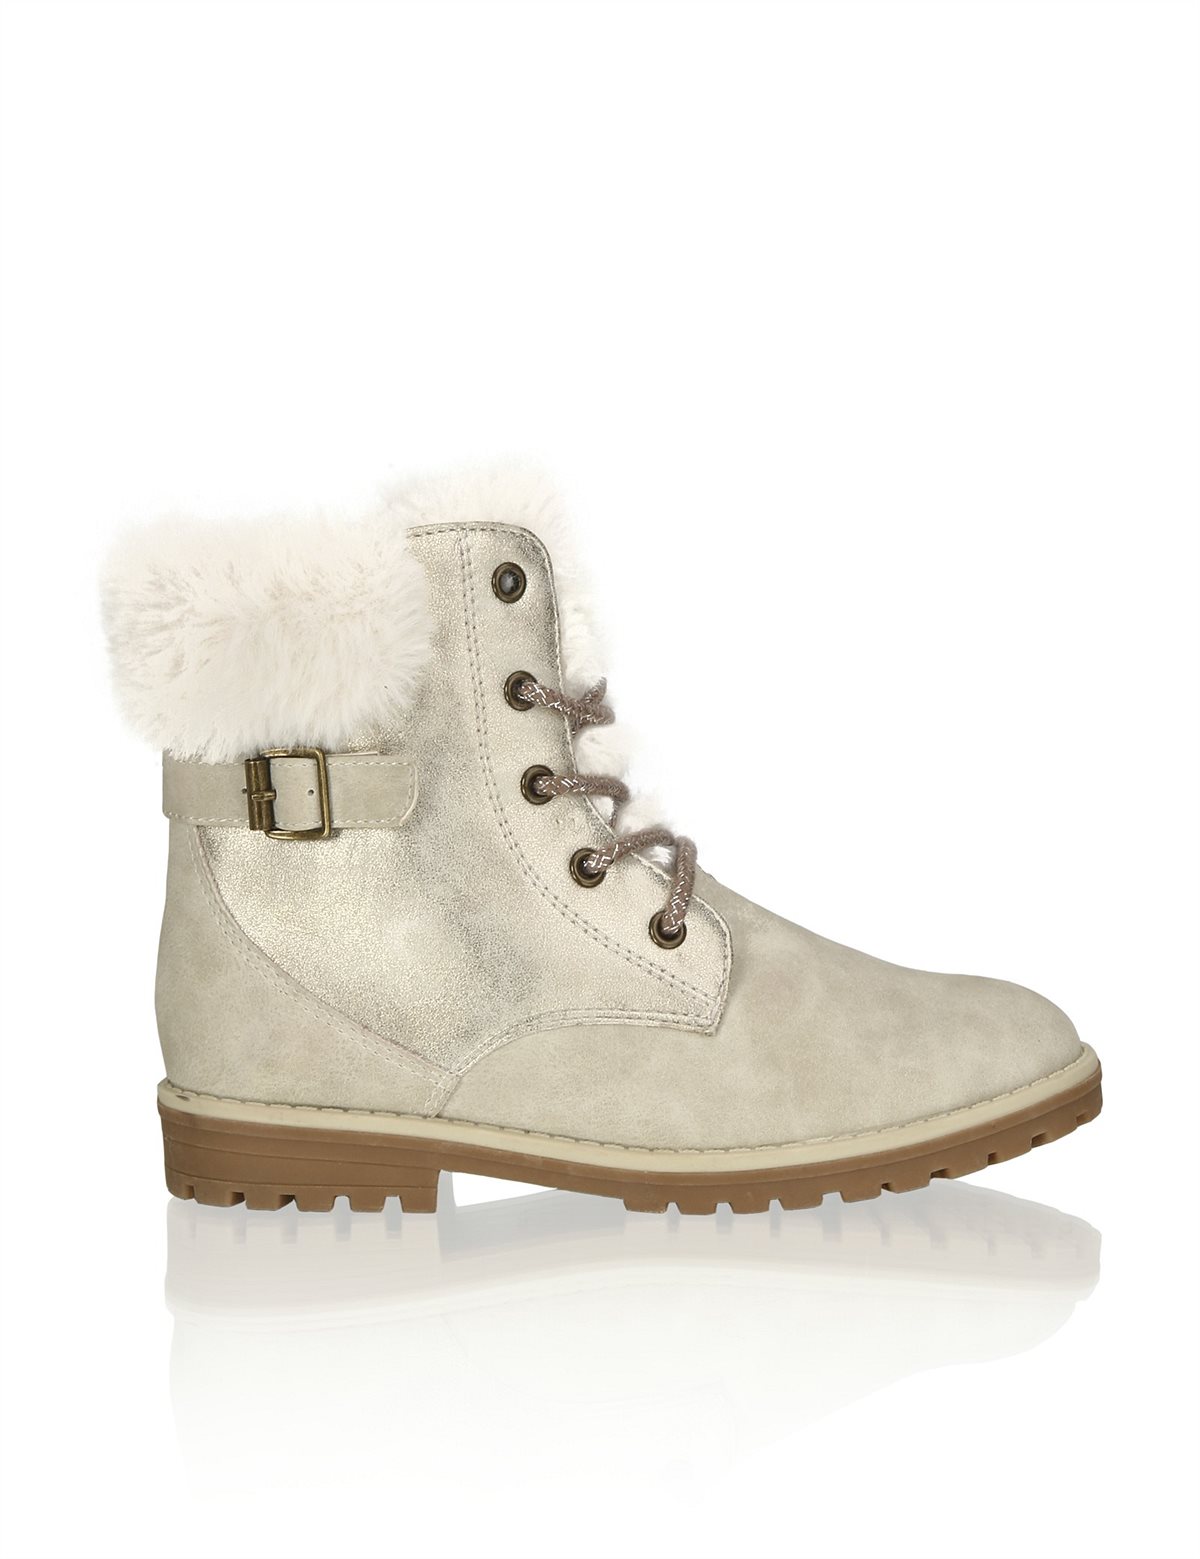 HUMANIC 70 Funky Girls Boots mit Warmfutter EUR 39,95 3623504725